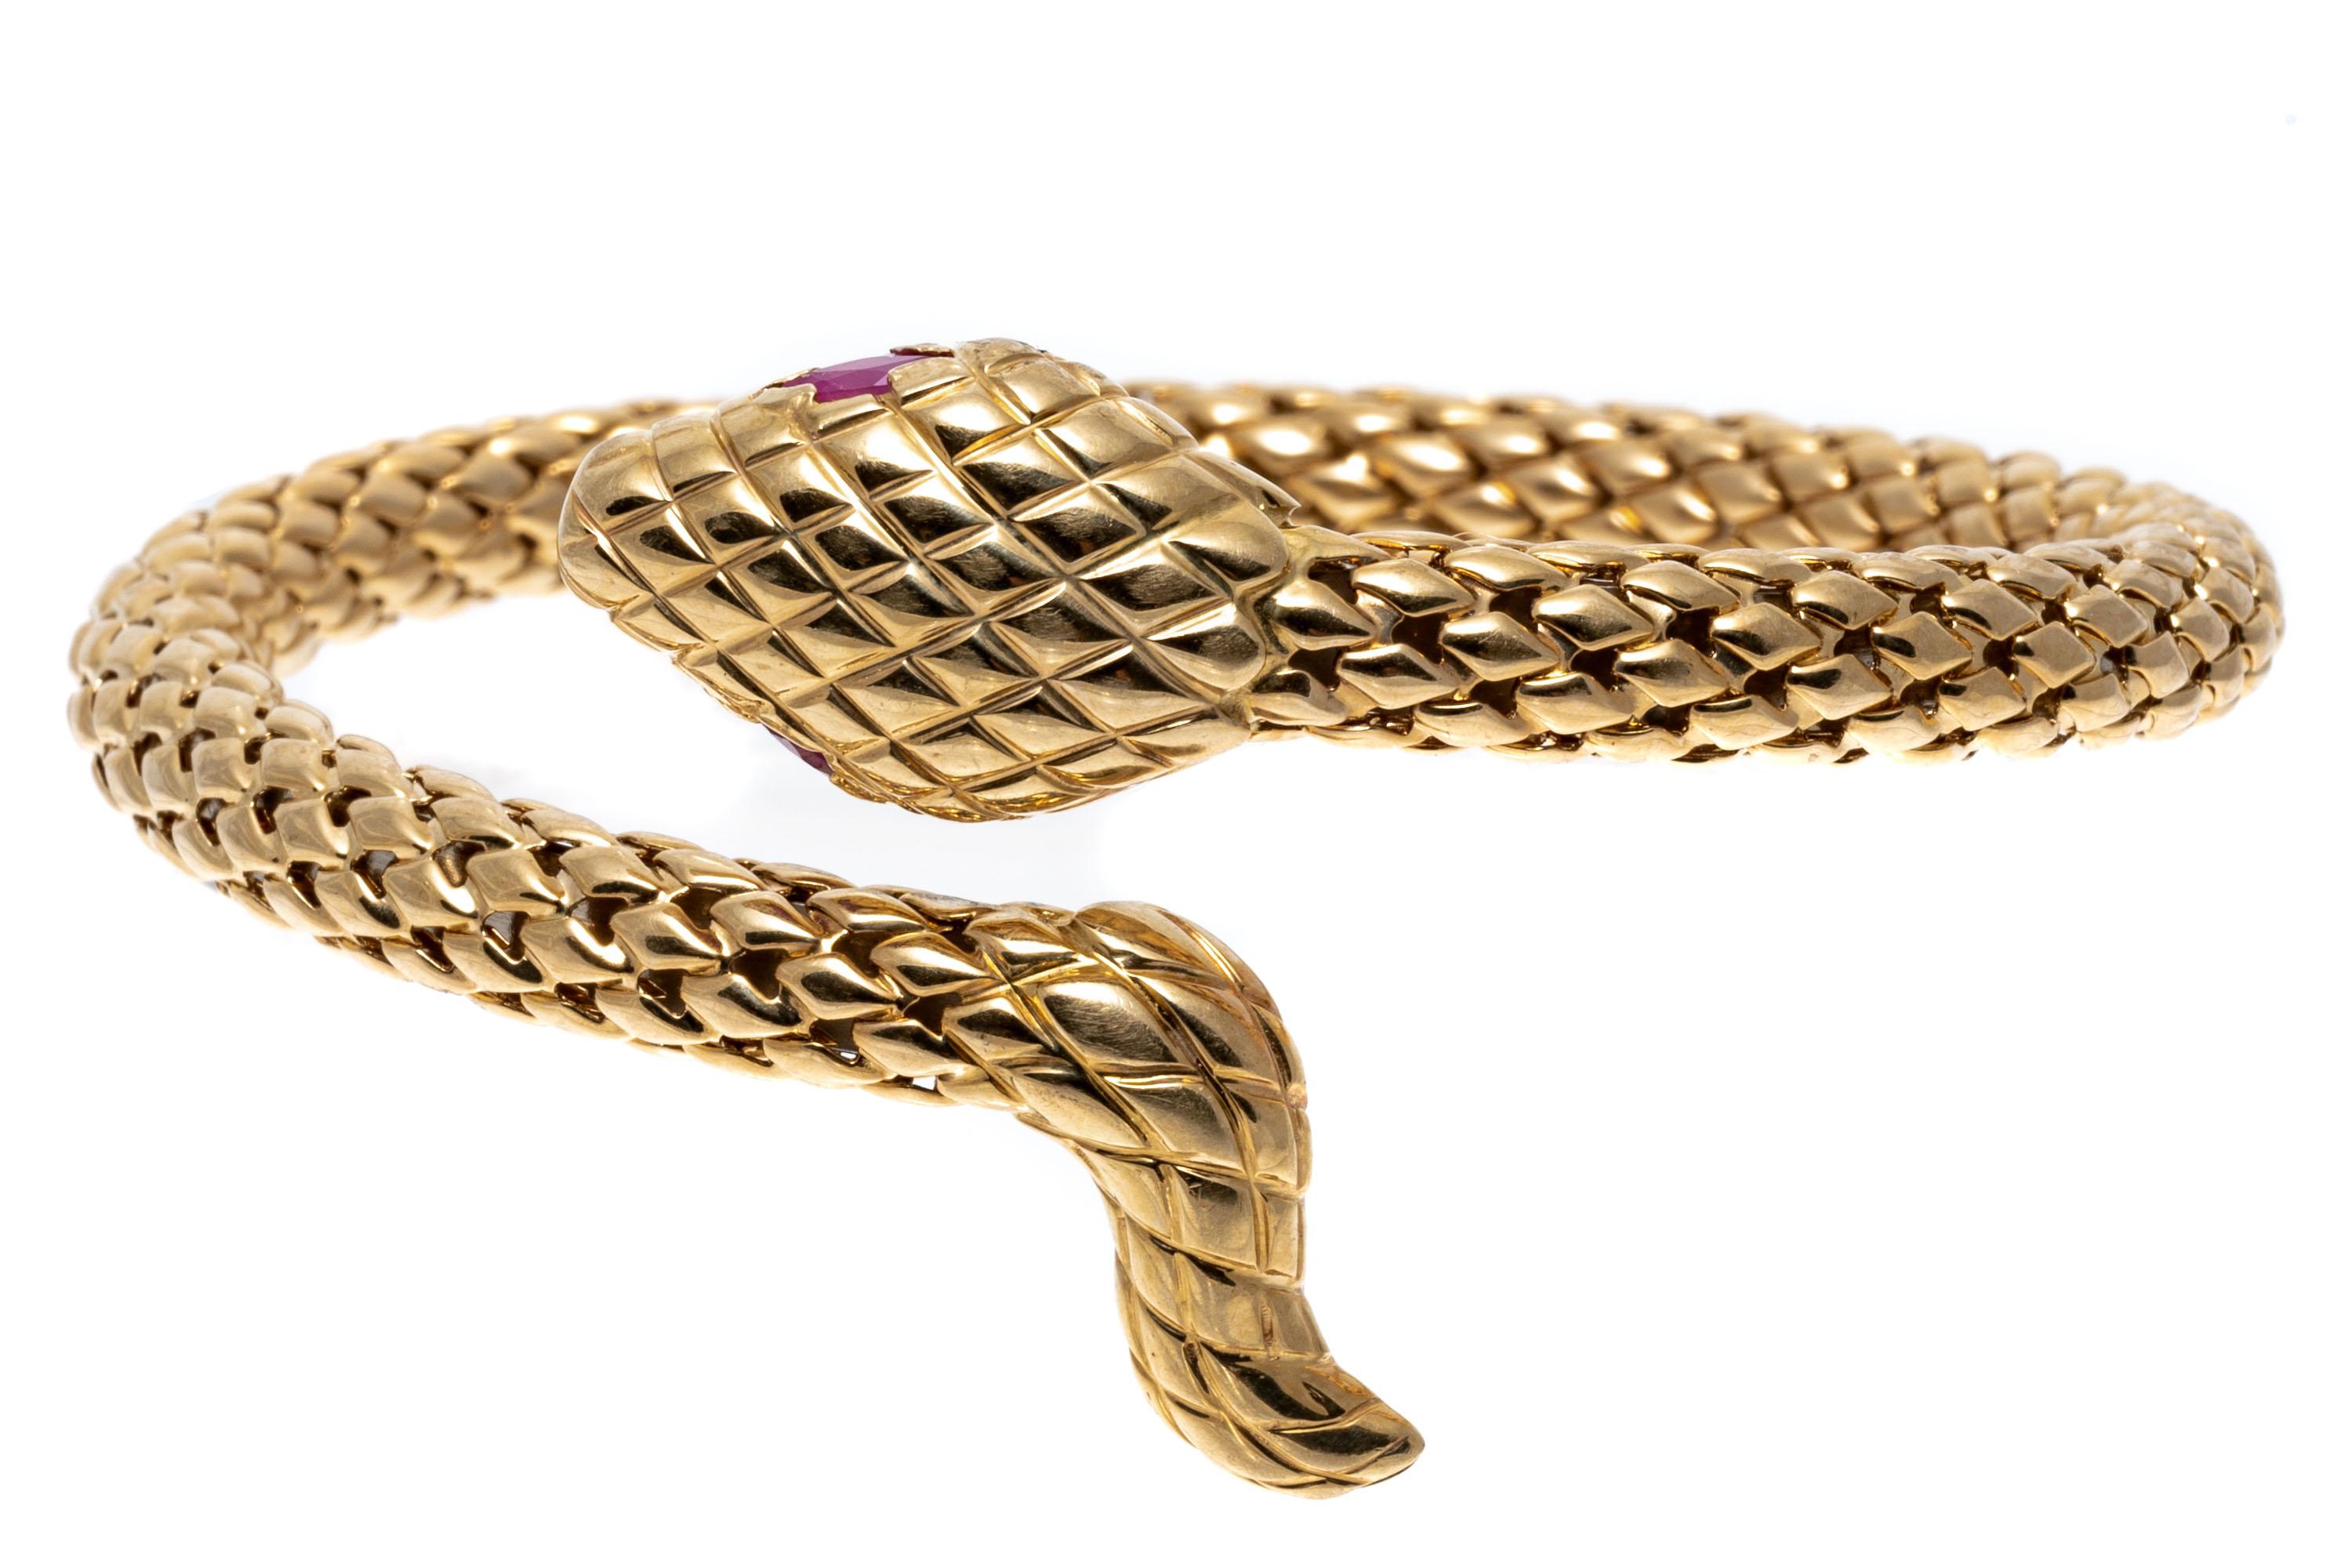 14k yellow gold bracelet. This bold bracelet is a springed tube coil style in the form of a snake, patterned with a quilted finish, head to tail, and set with marquise shaped pinkish red ruby eyes, approximately 0.26 TCW.
Marks: 14k
Dimensions: 2